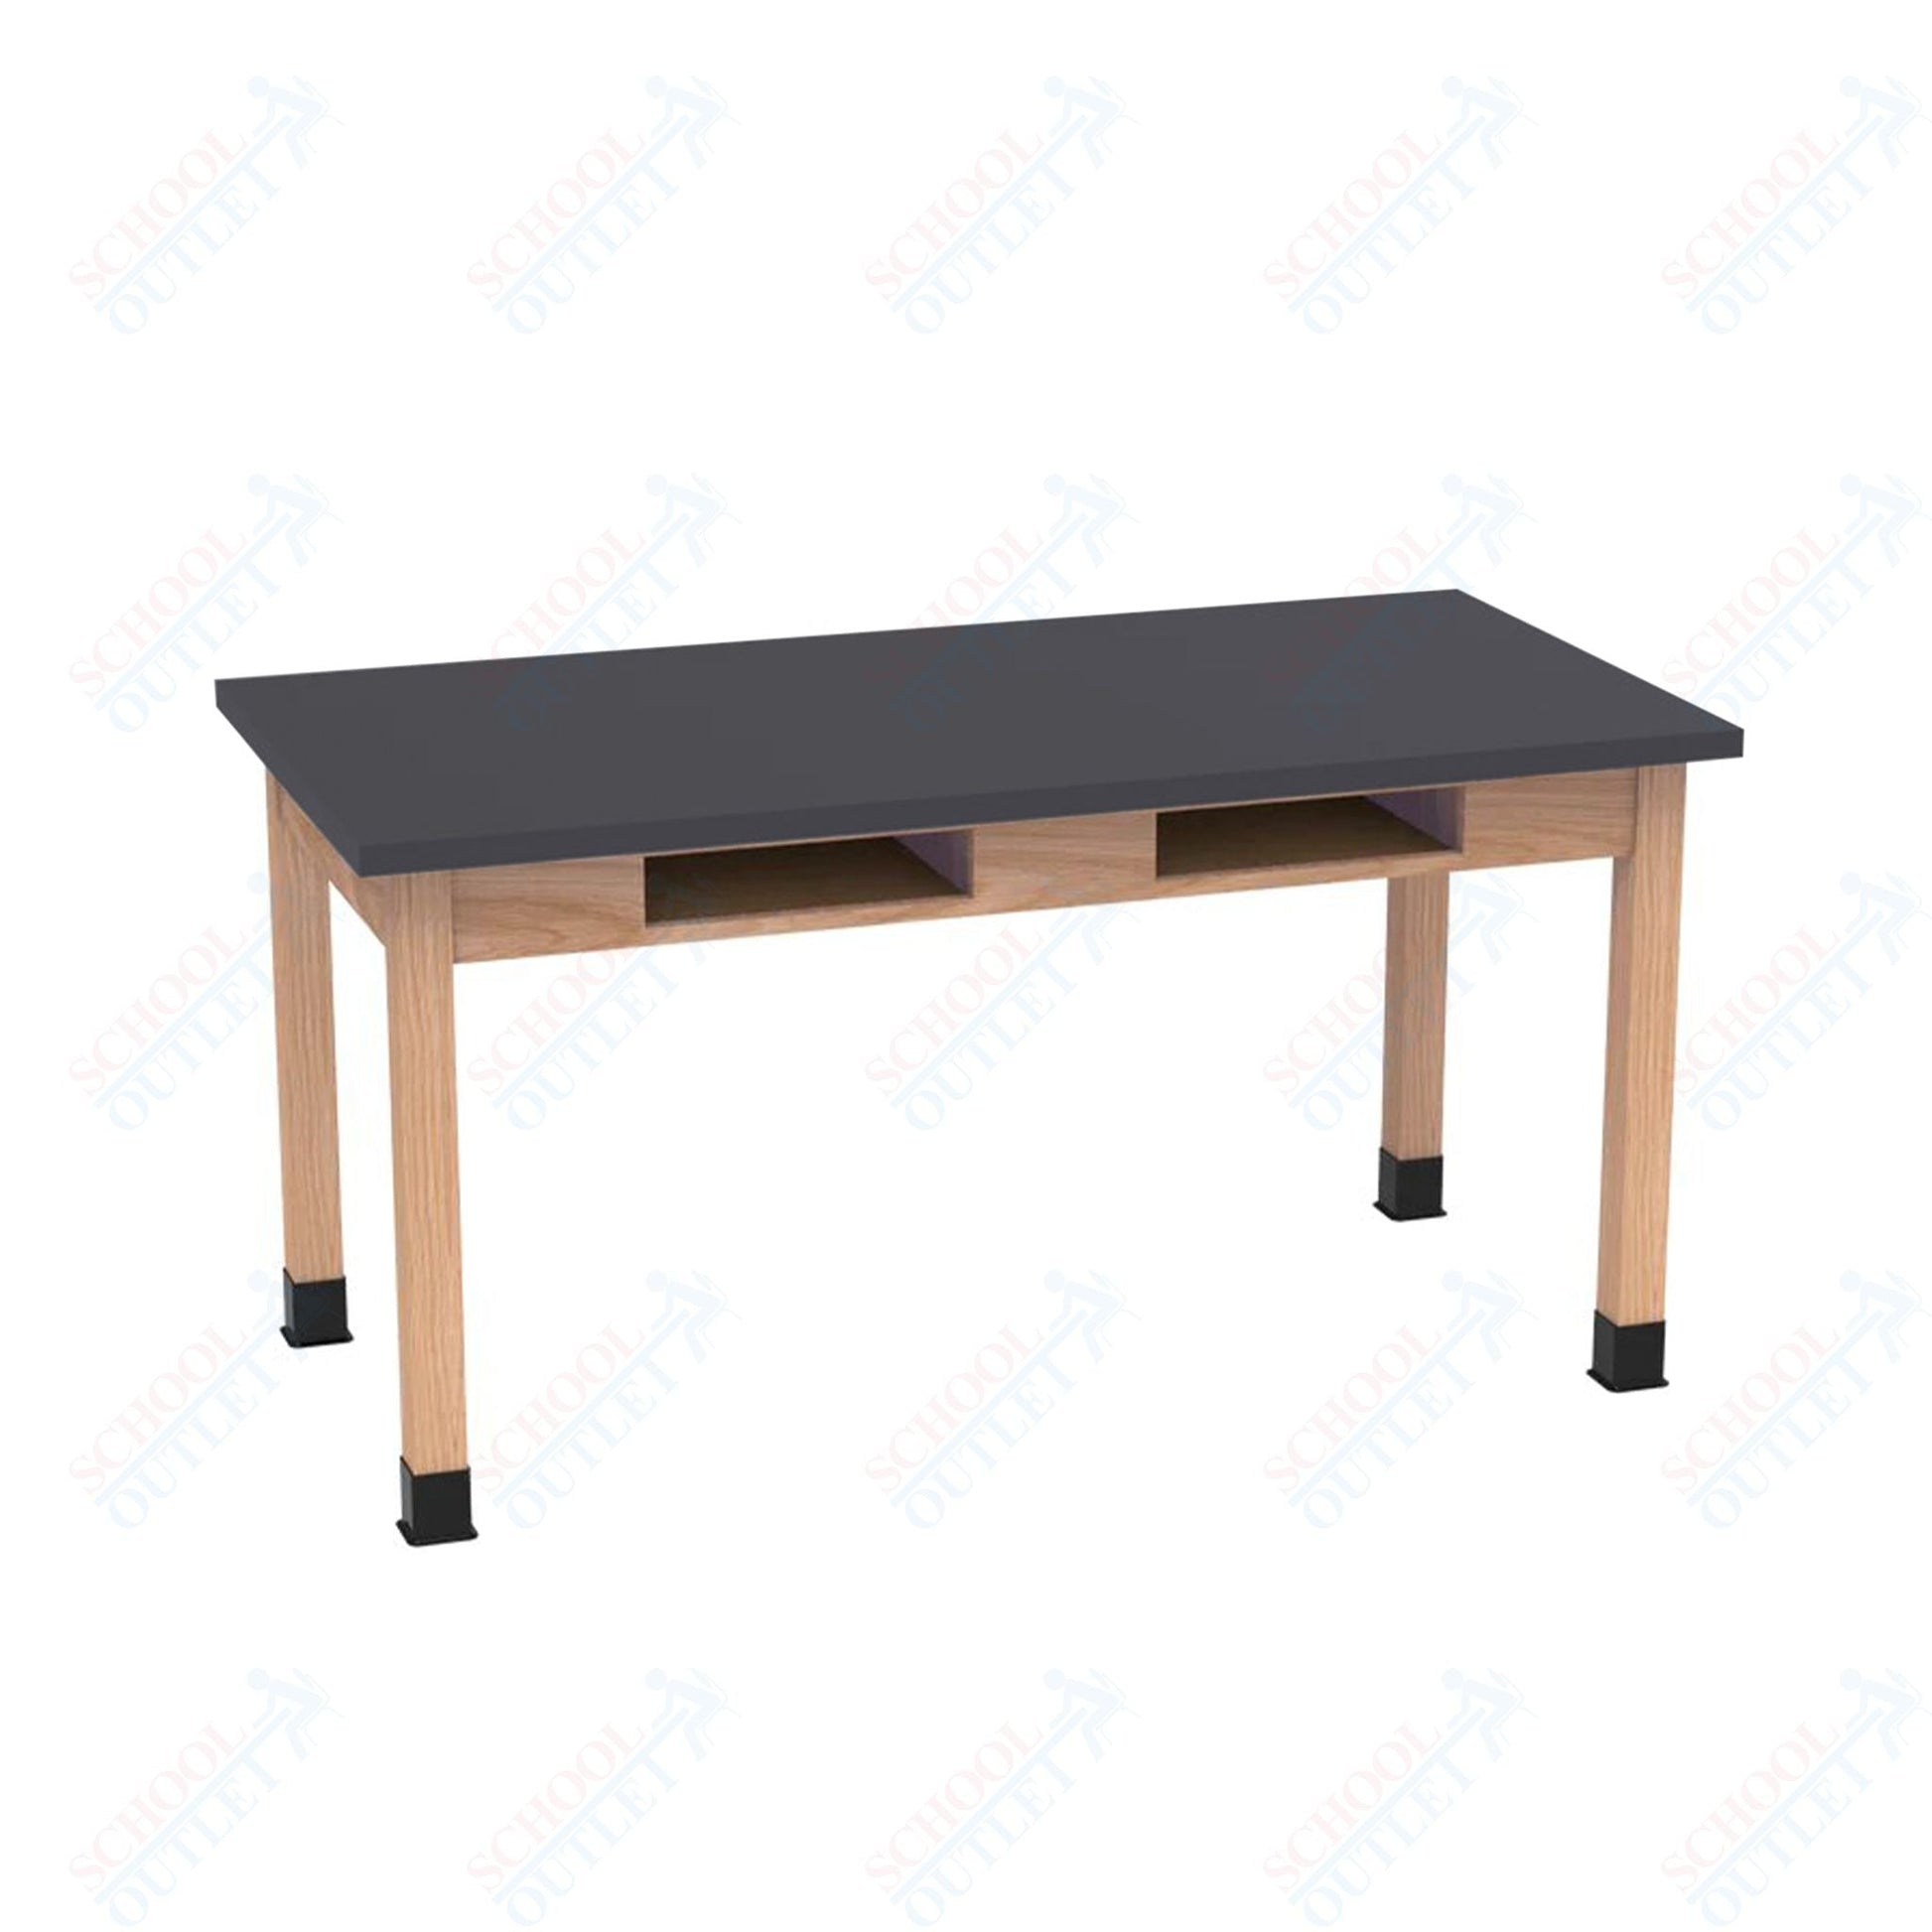 Diversified Woodcrafts Science Table w/ Book Compartment - 60" W x 24" D - Solid Oak Frame and Adjustable Glides - SchoolOutlet